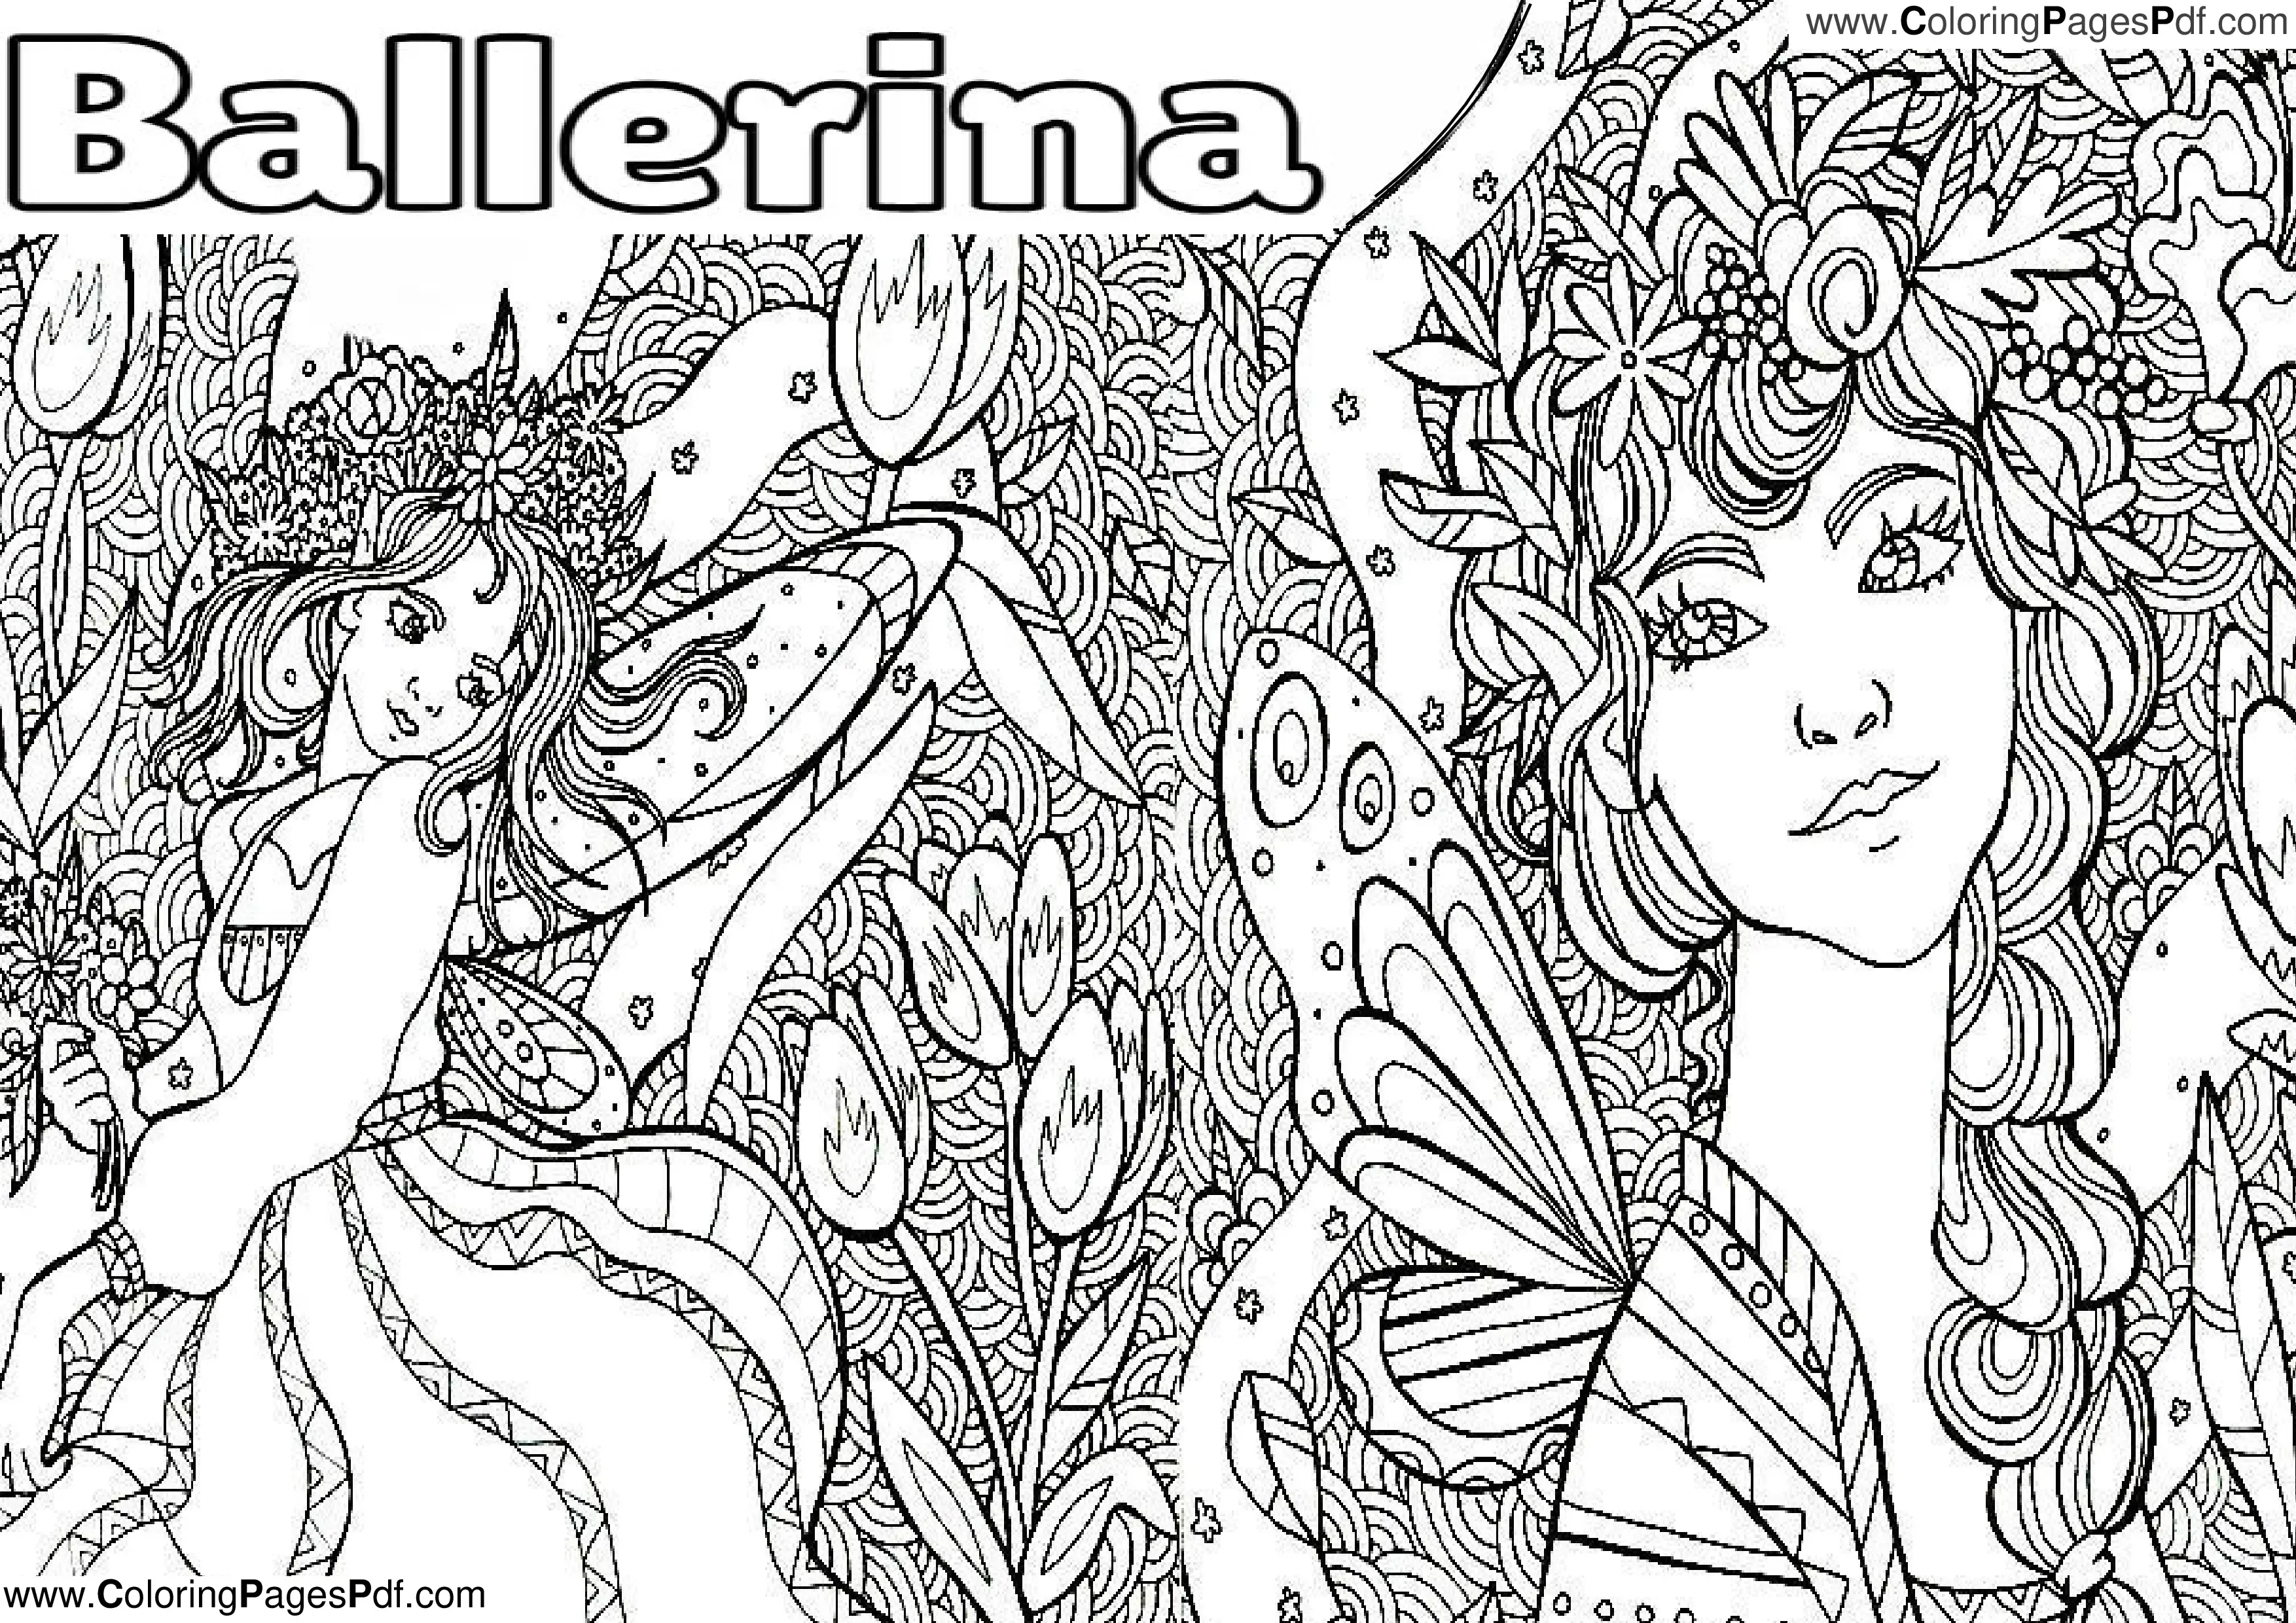 Black ballerina coloring pages